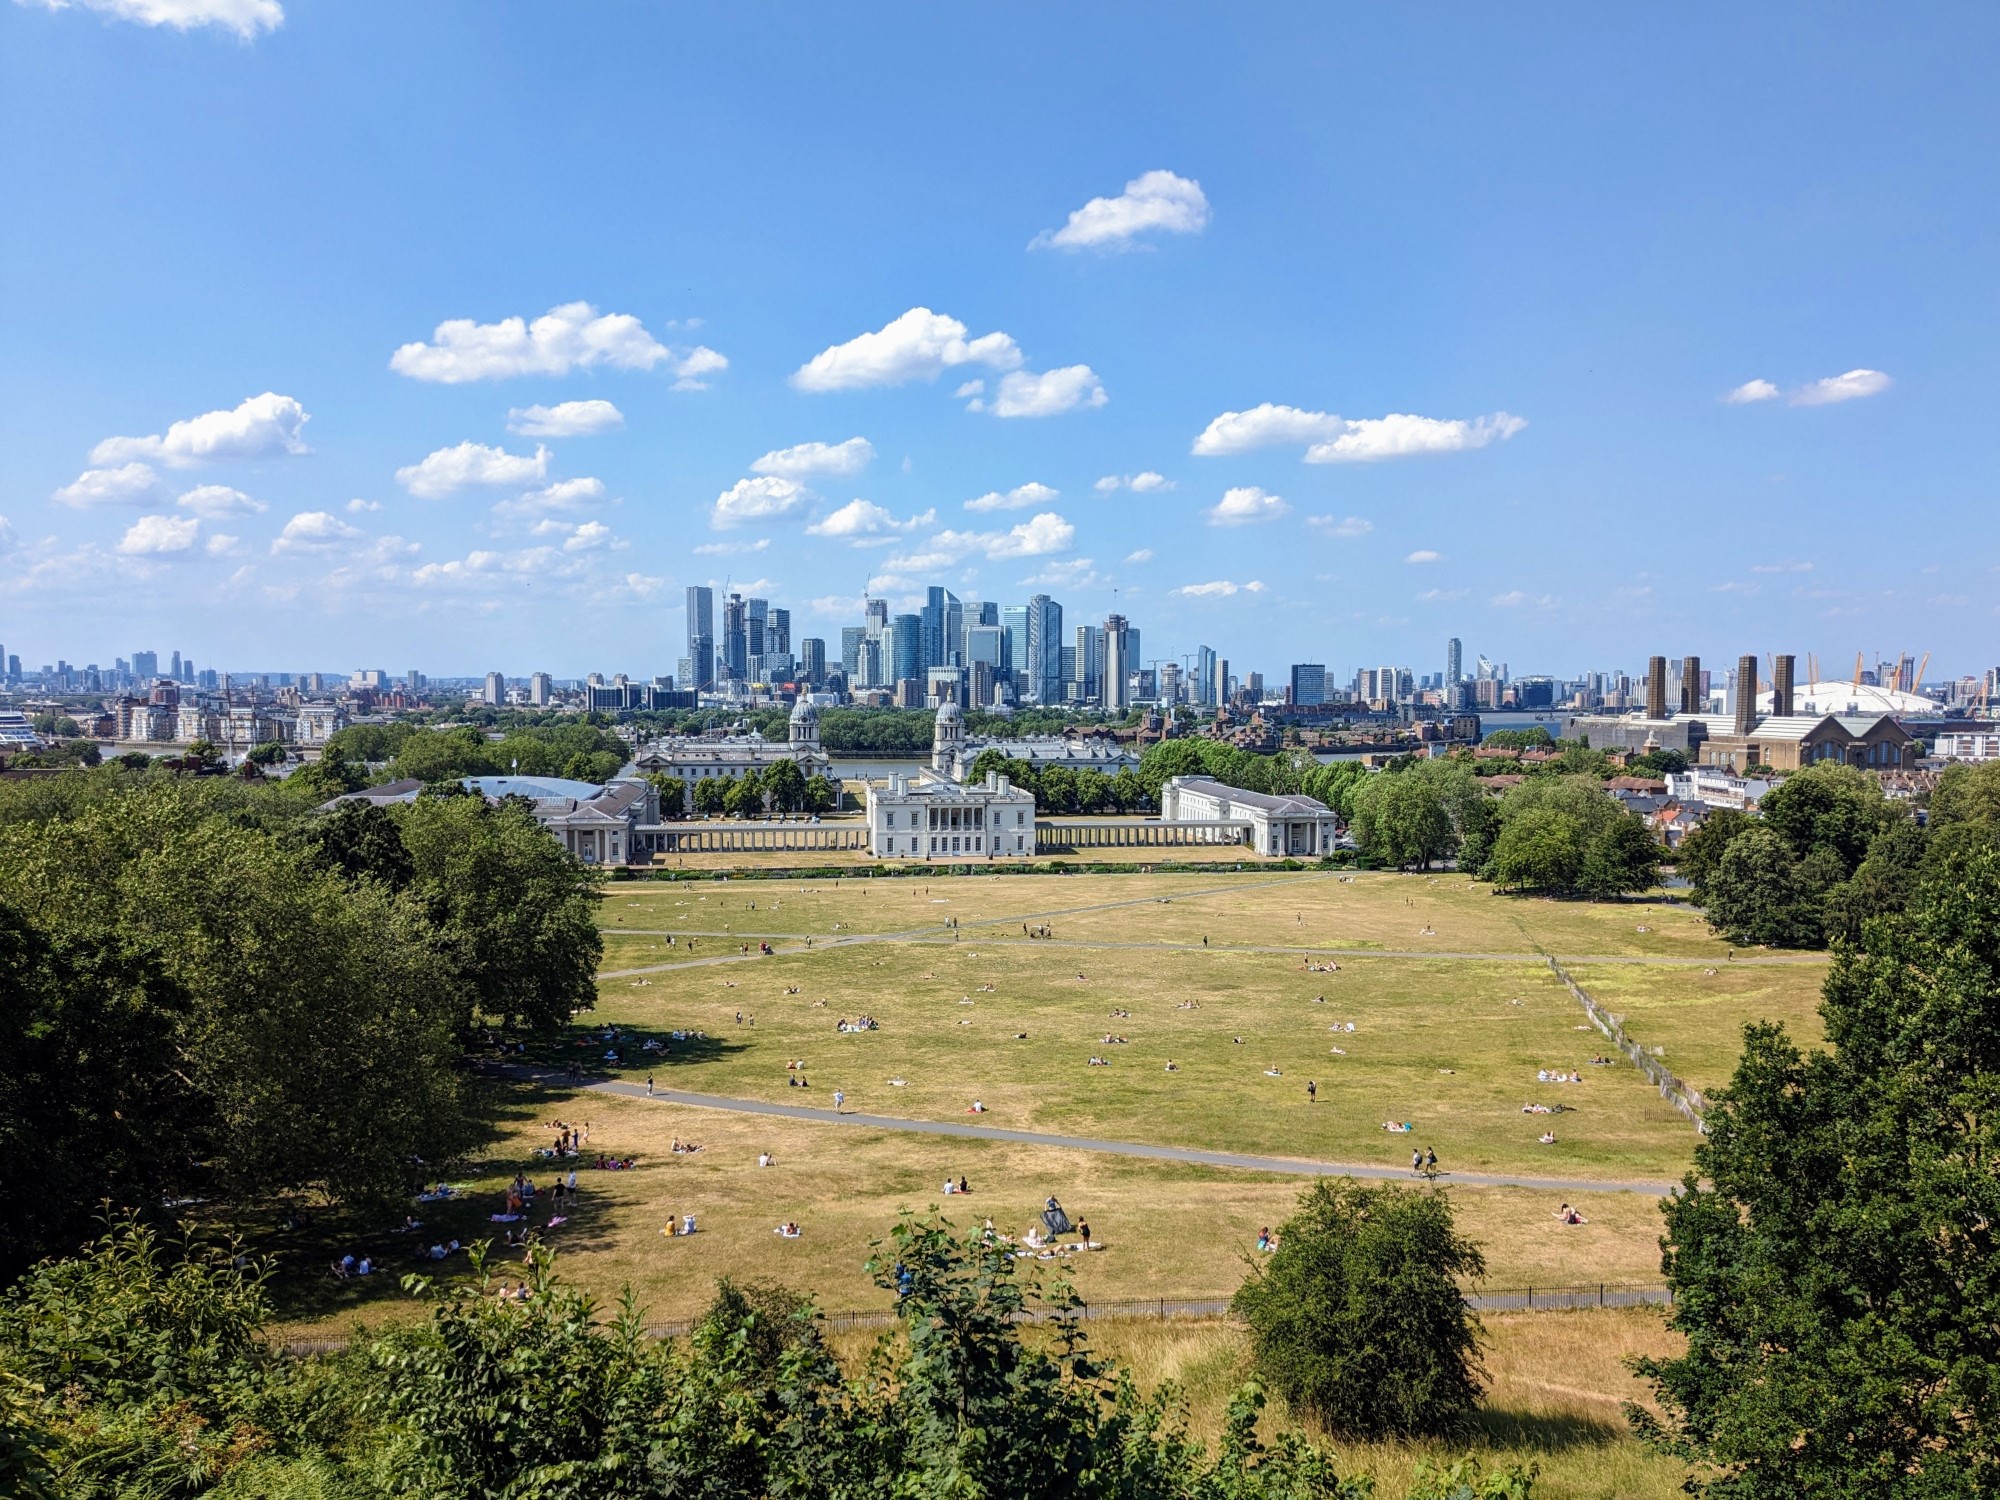 View from a hill over an expansive open grassed park with trees on either side, a grand historic building, the river Thames, and a cluster of skyscrapers beyond.